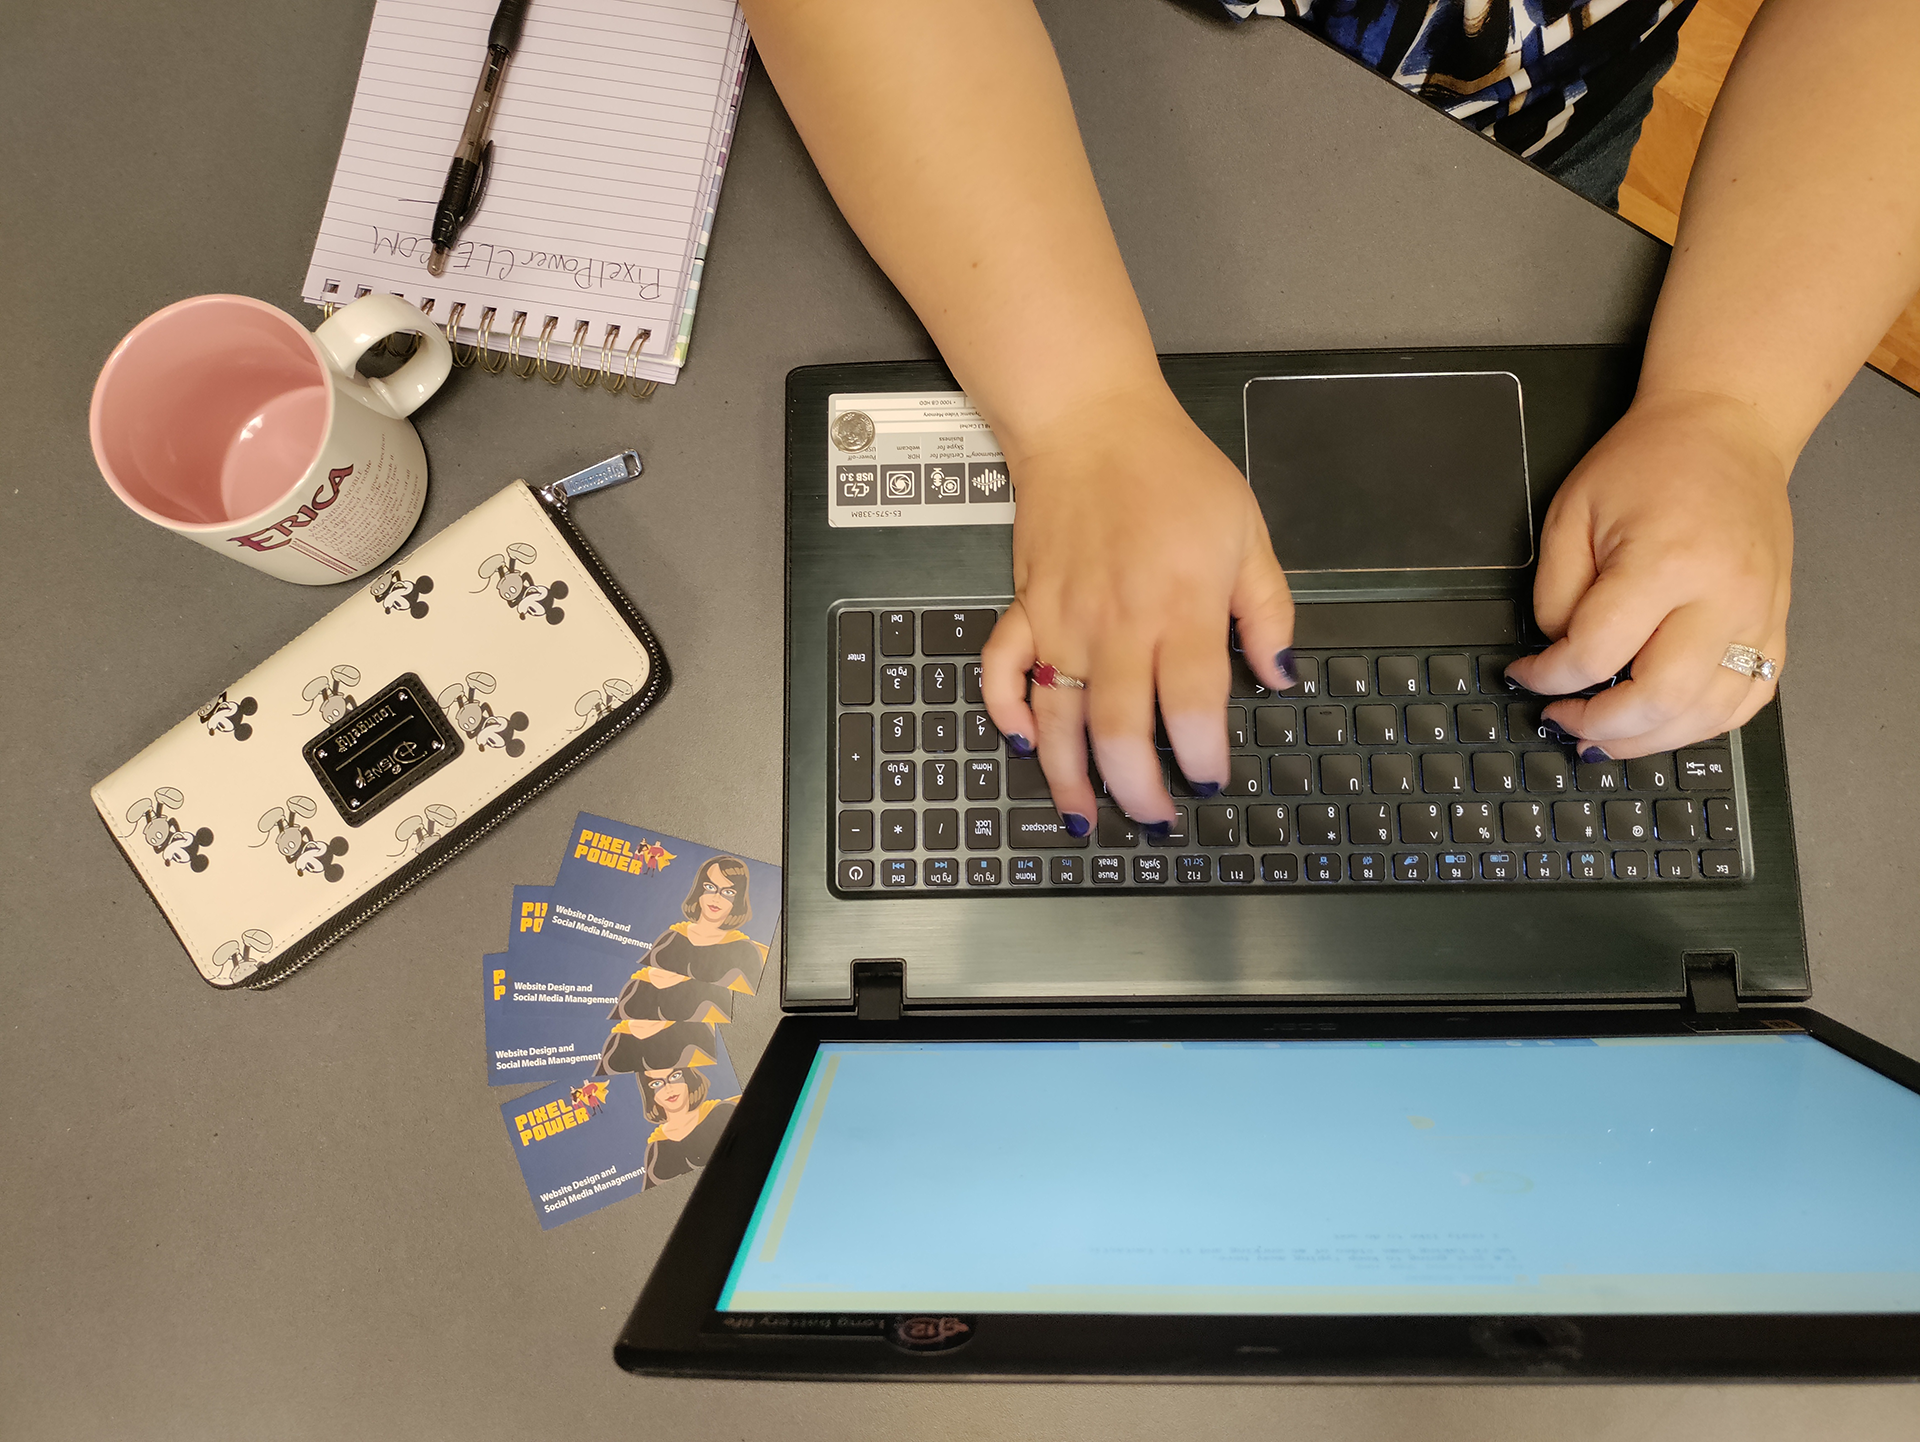 Ladies hands typing on a computer with business cards, mug, and wallet nearby